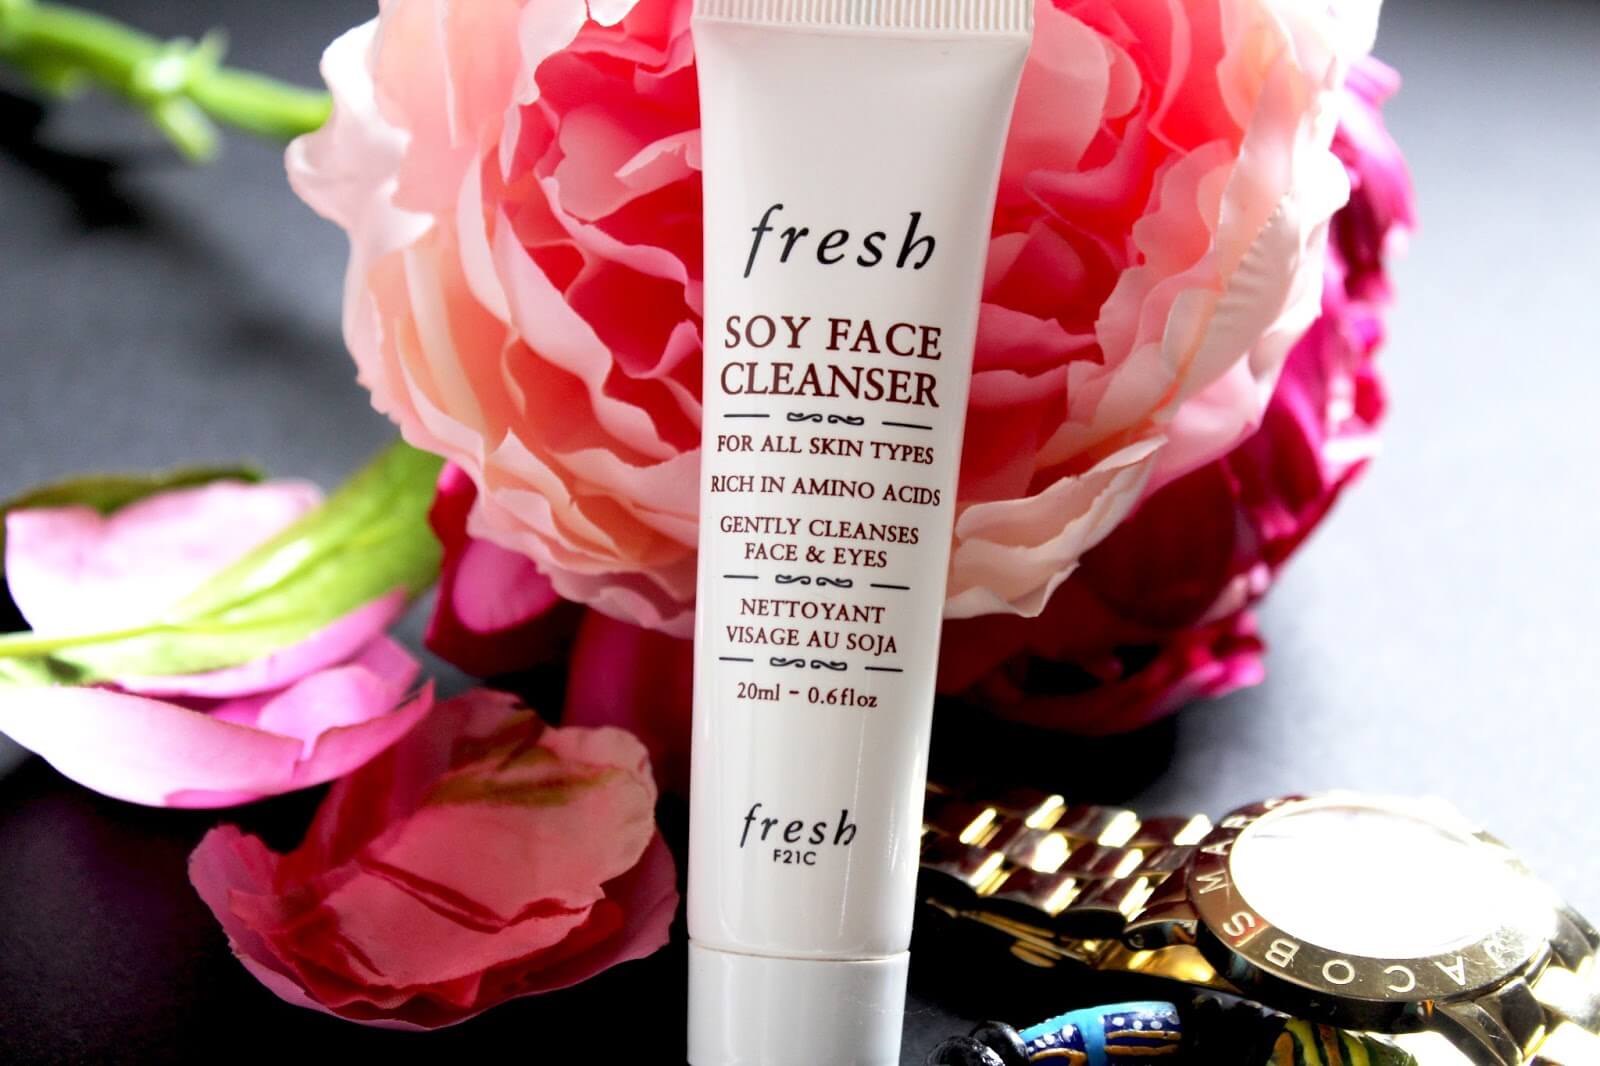 Fresh,Soy Face Cleanser,เจลล้างหน้าเฟรซ,เฟรซ,Soy Face Cleanserขนาด50ml,Soy Face Cleanserราคา,Soy Face Cleanser ซื้อได้ที่,เจลล้างหน้า,คลีนเซอร์